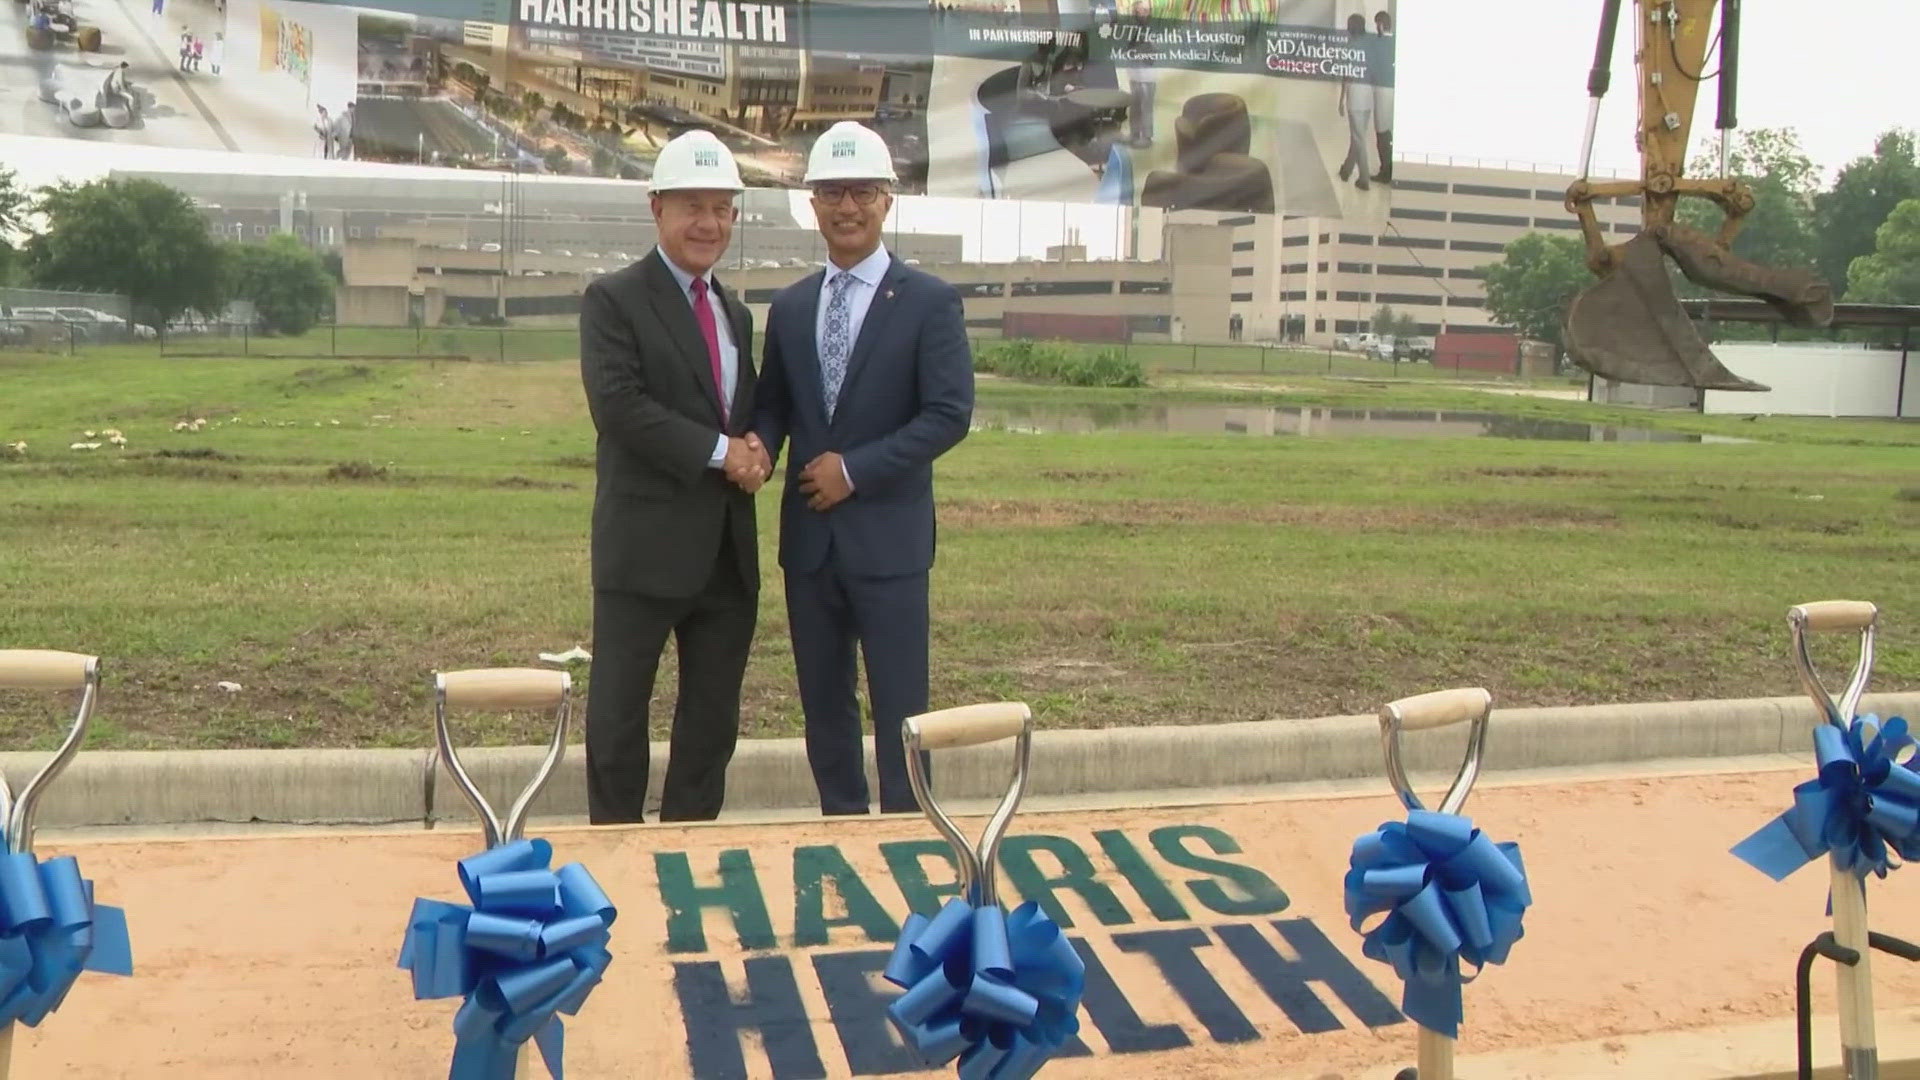 Houston Mayor John Whitmire was among those breaking ground at the site of the new trauma center.